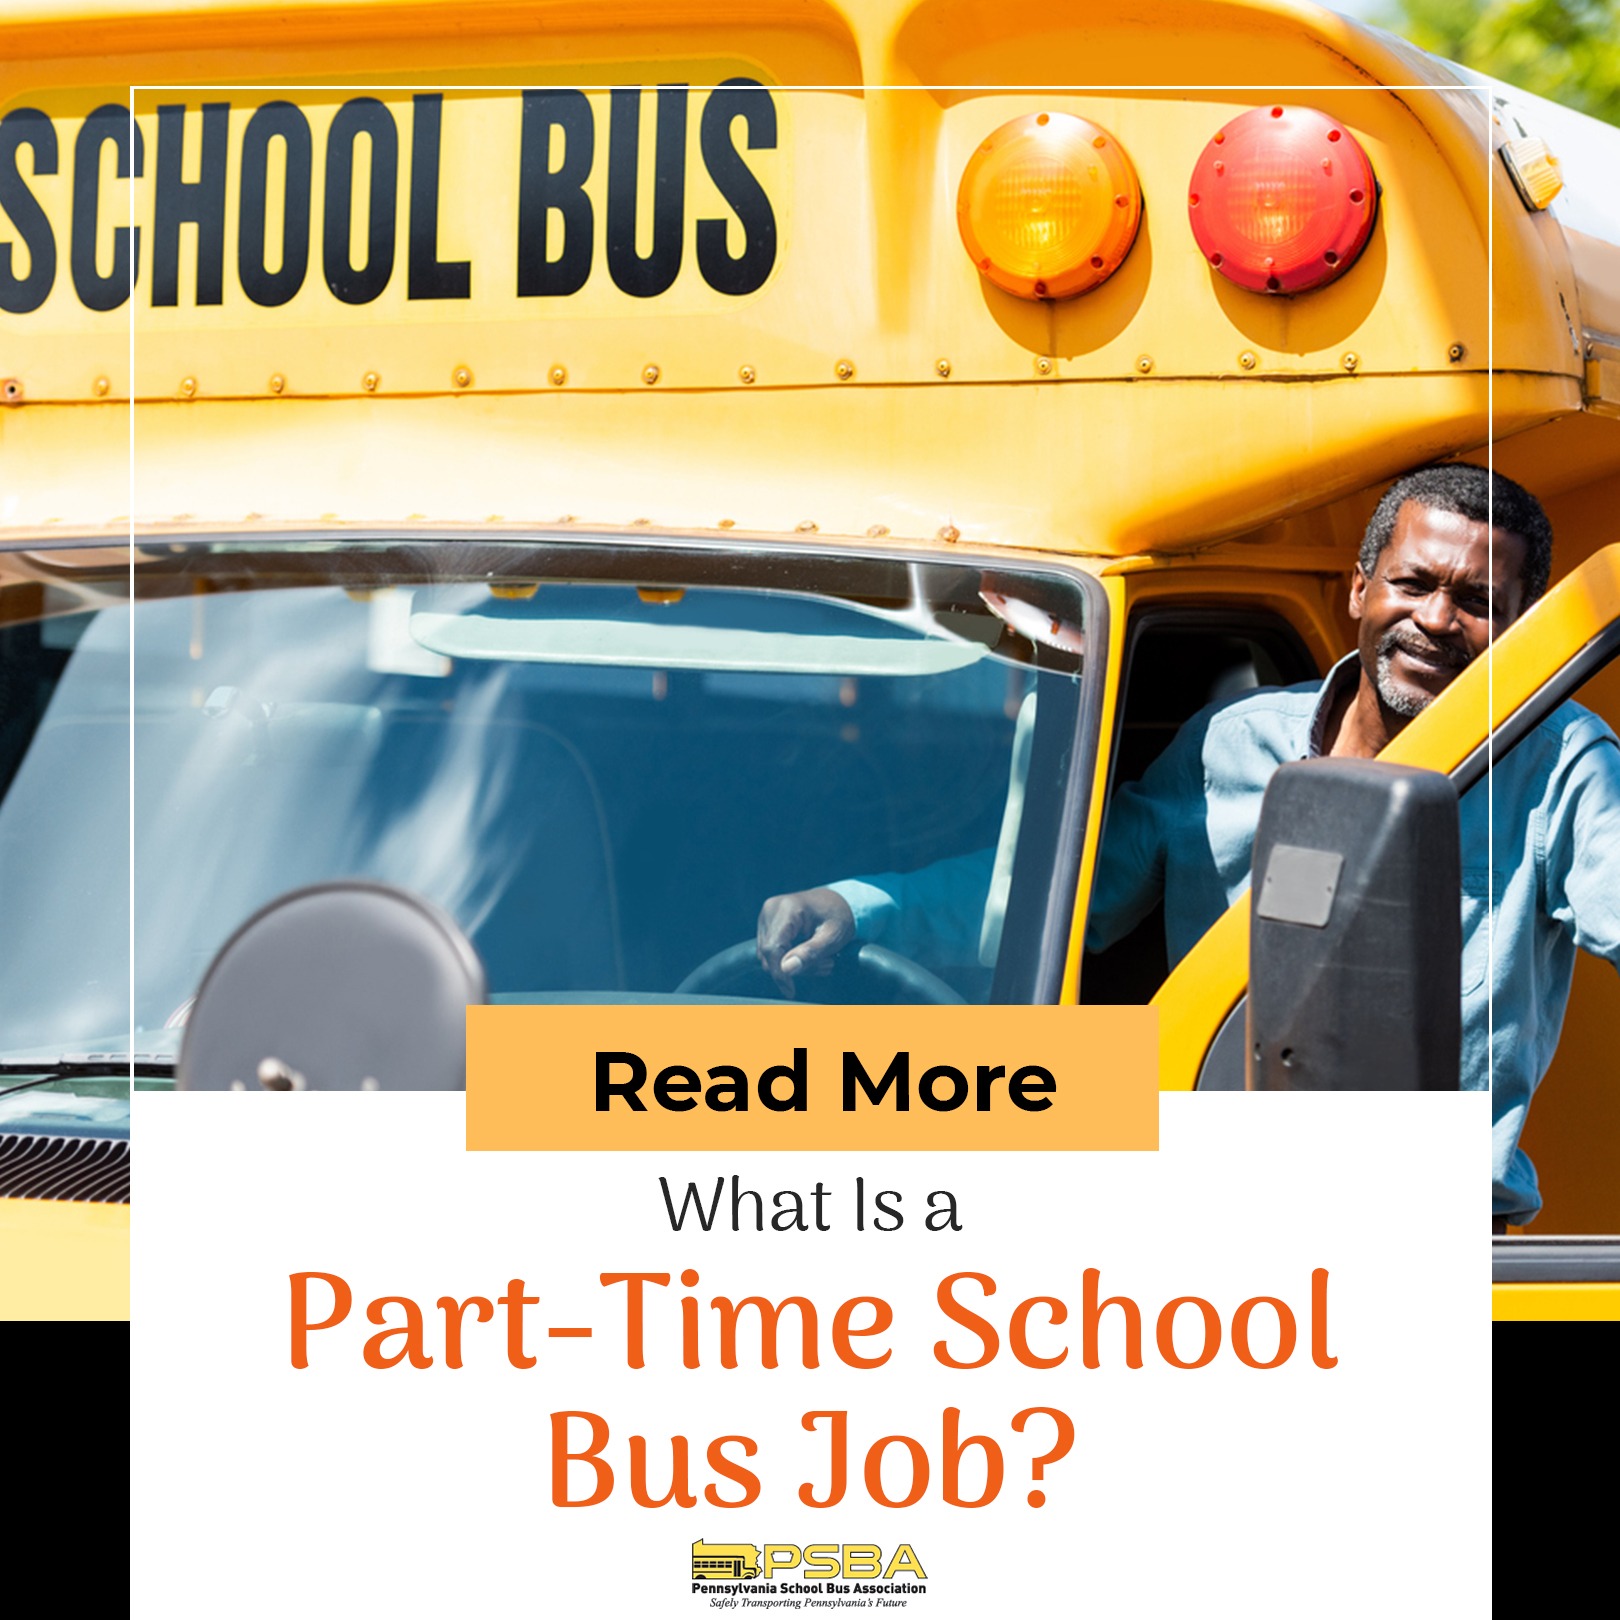 What Is a Part-Time School Bus Job?